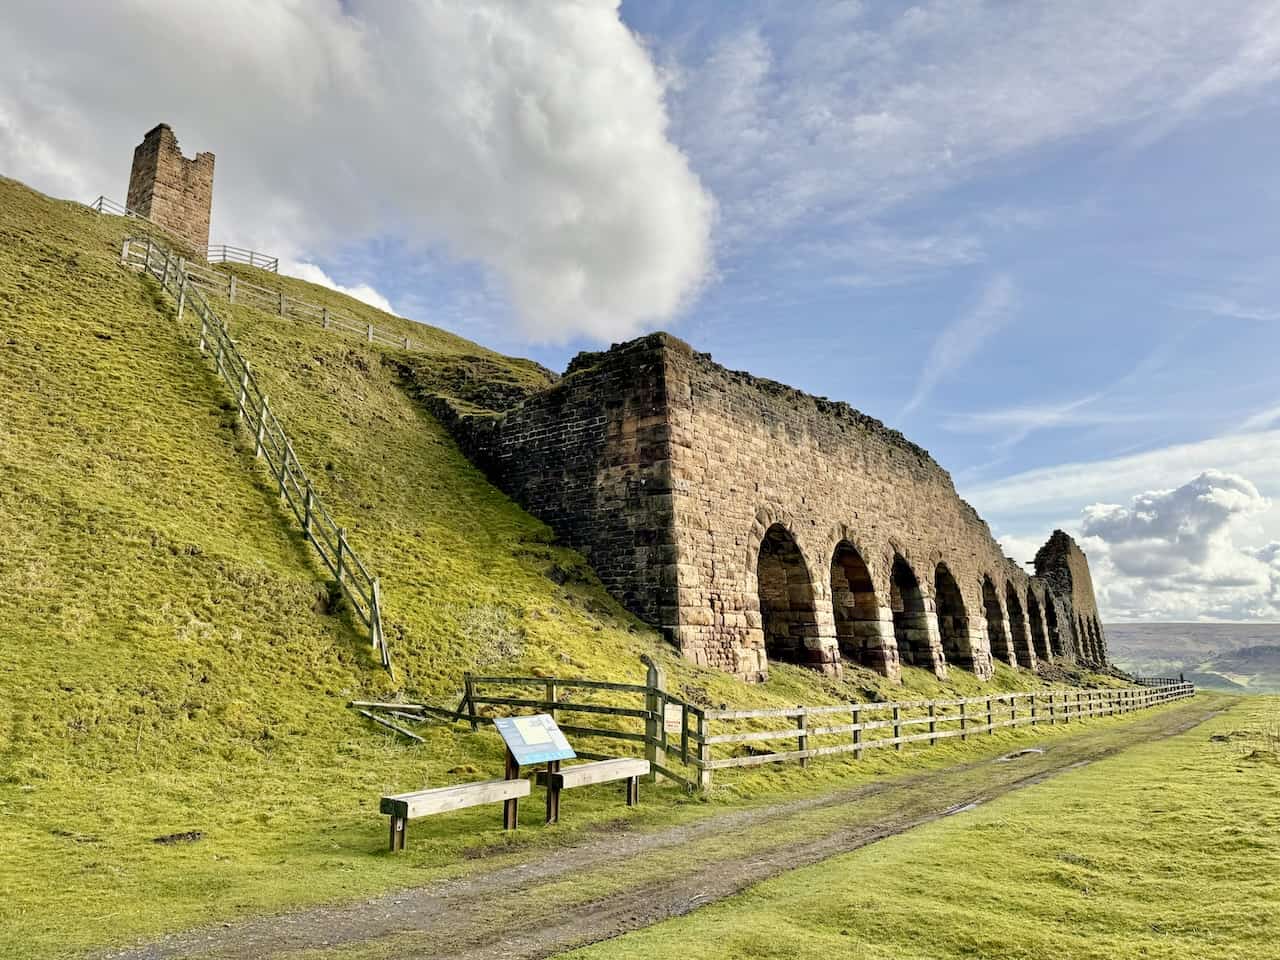 East Mines' Stone Kilns, standing testament to the arduous work of calcining ironstone, pivotal in the valley's industrial era.
